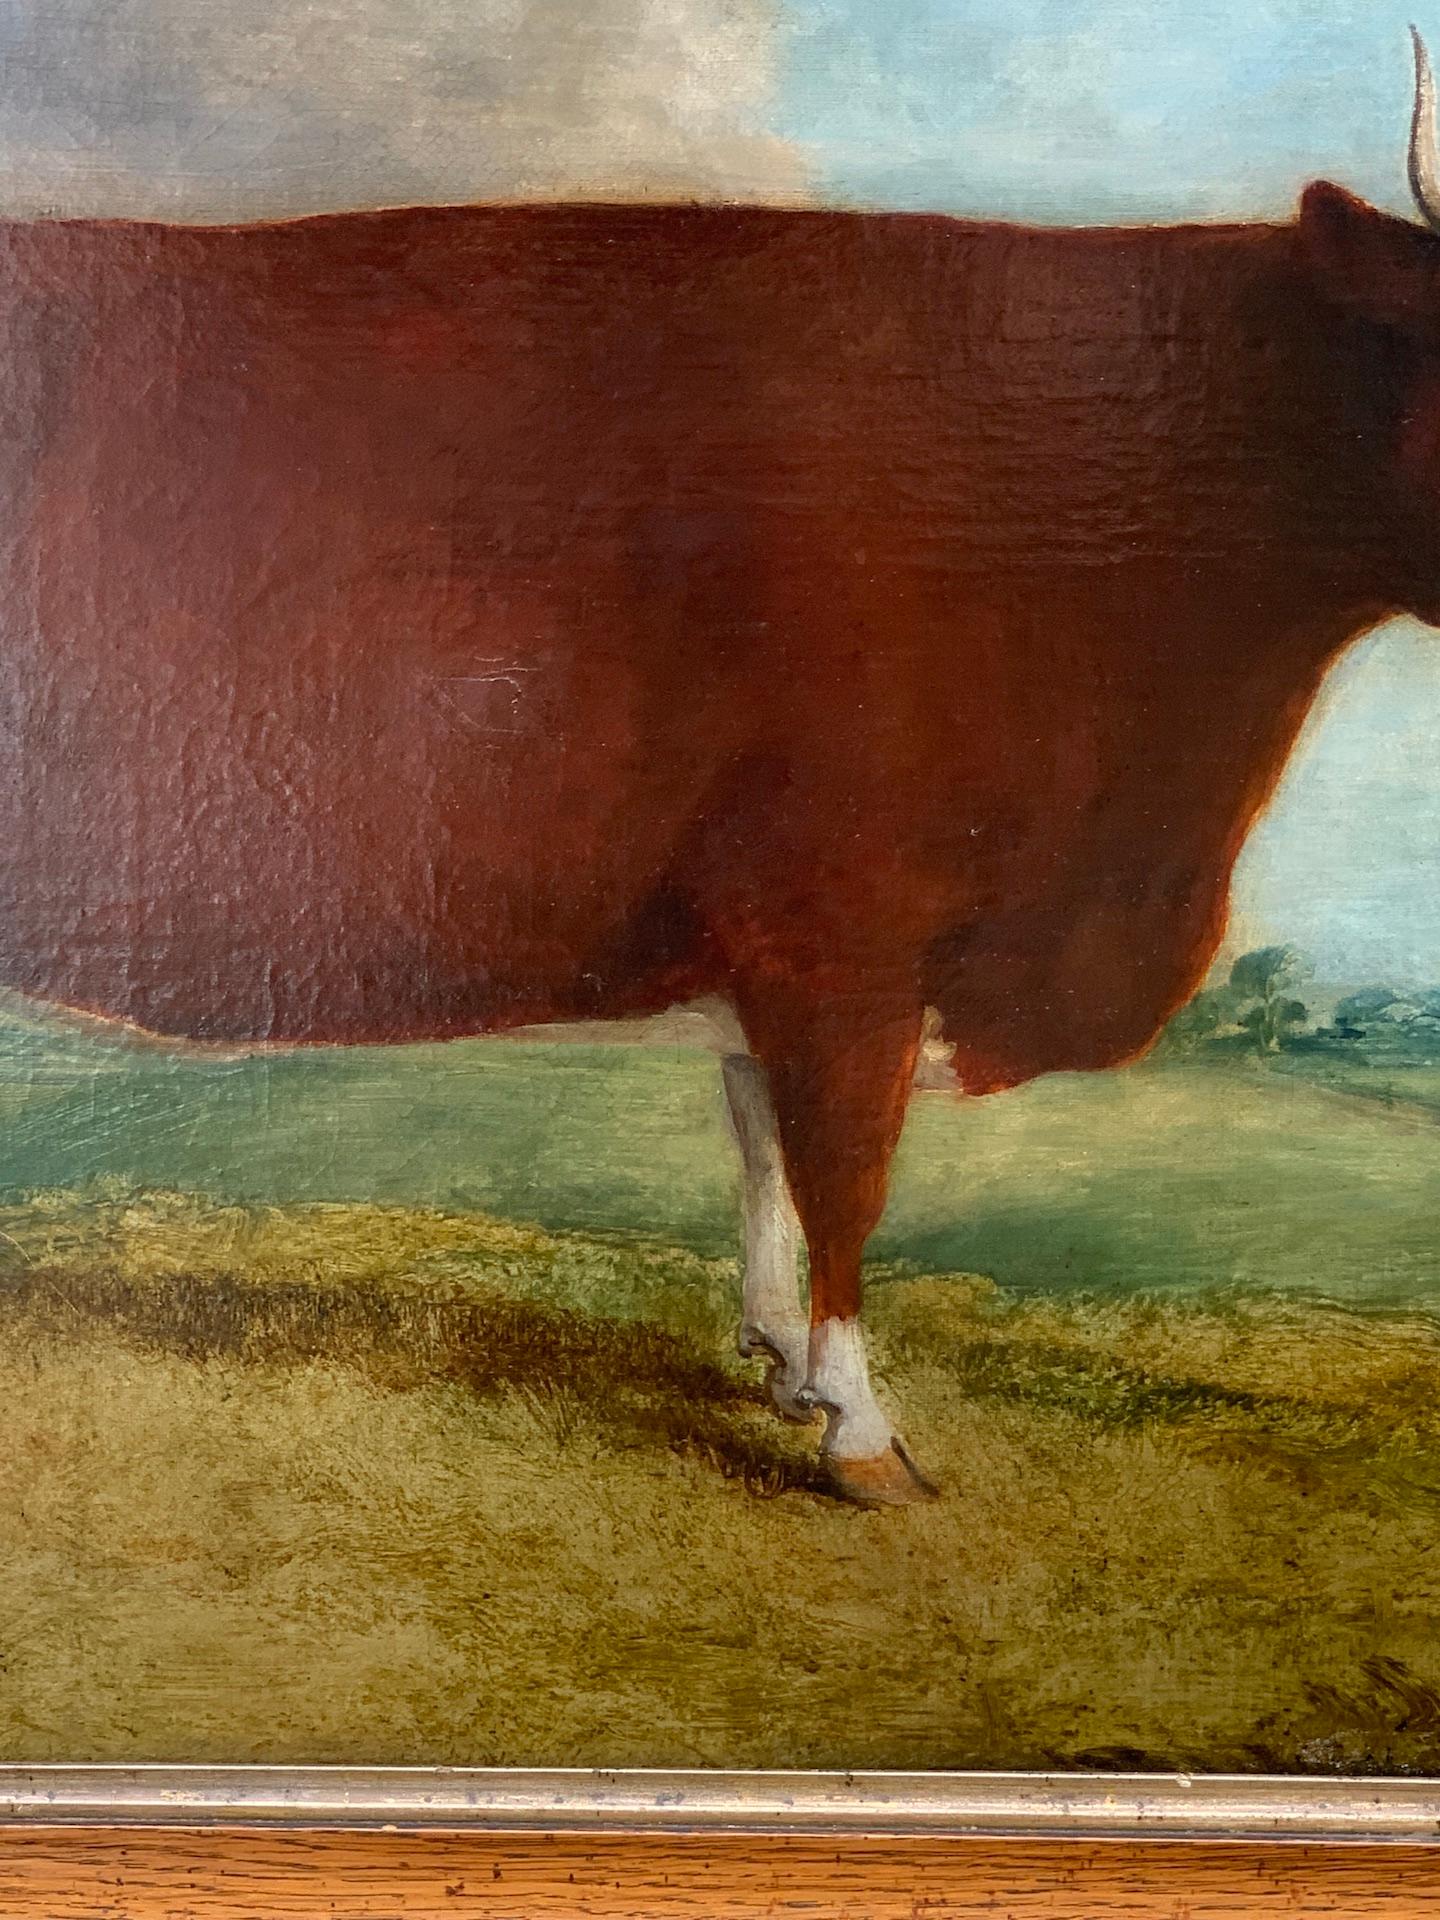 19th century English folk are portrait of a Bull in a landscape  - Folk Art Painting by John Miles of Northleach